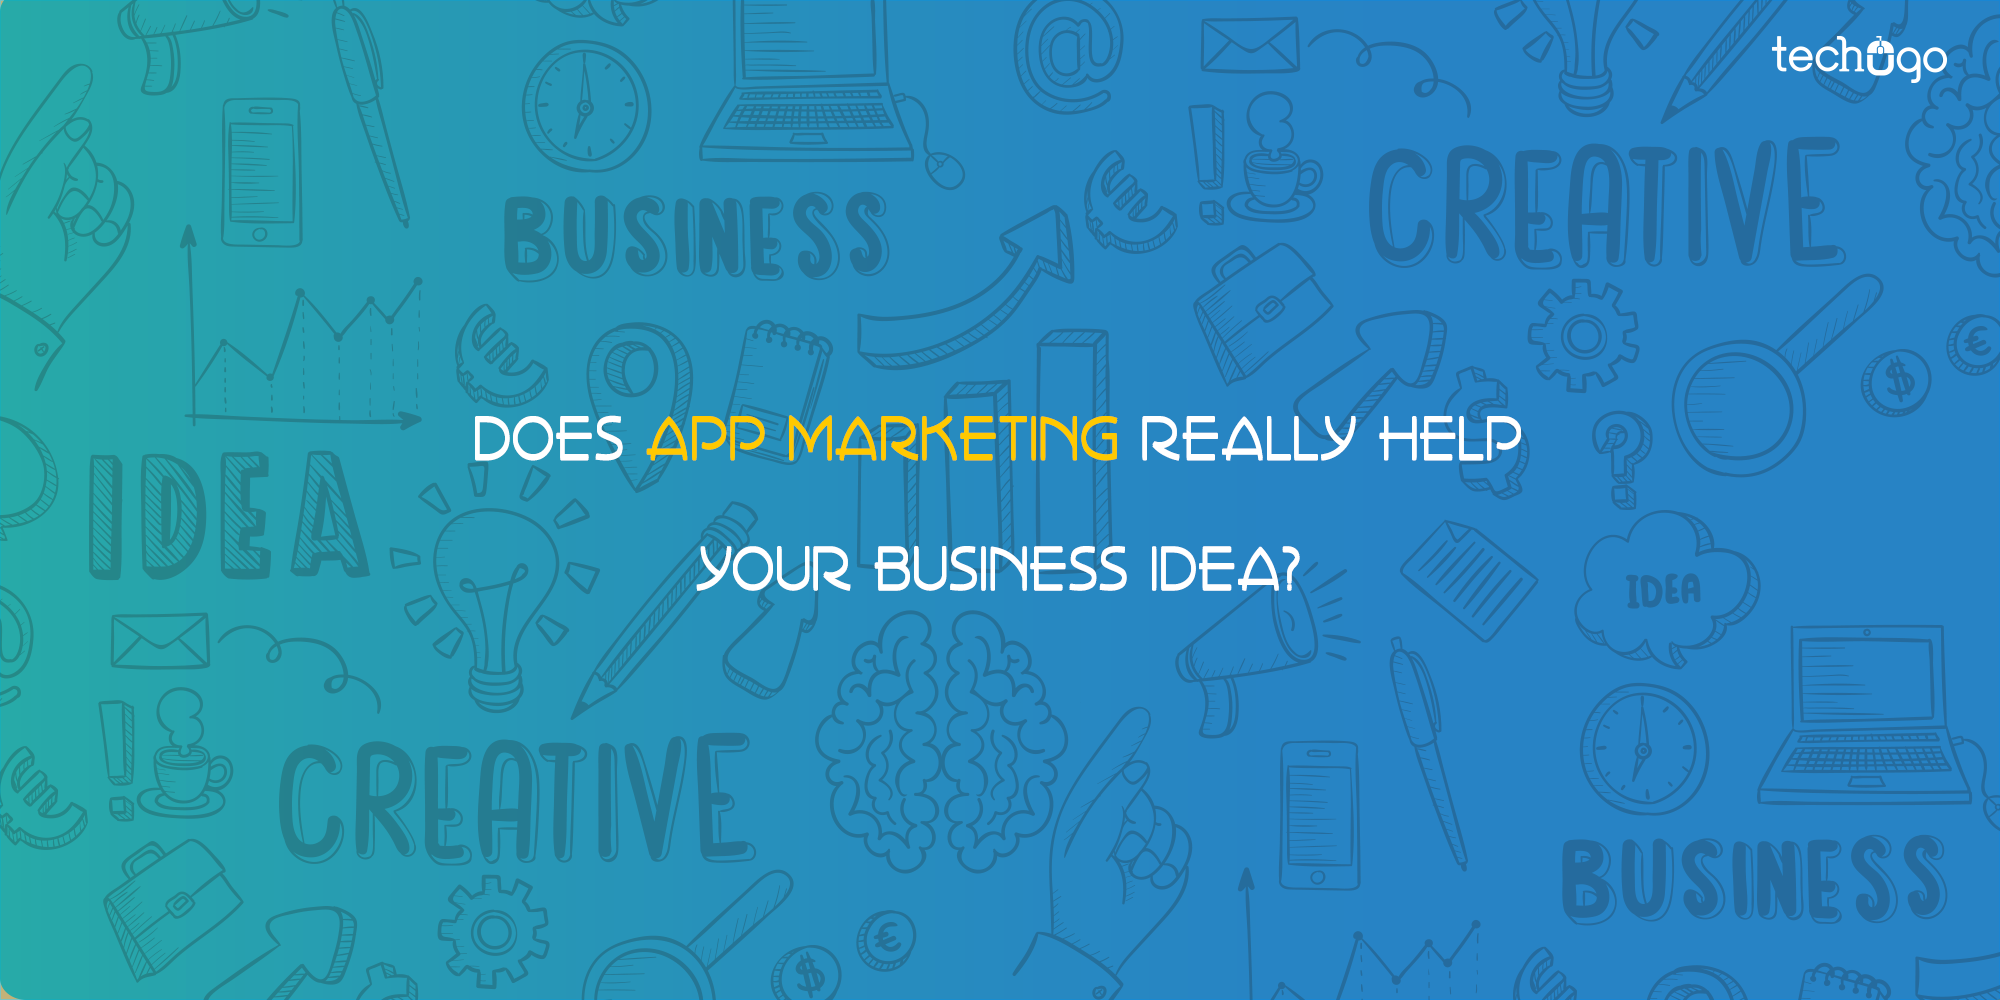 Does App Marketing Really Help Your Business Idea?